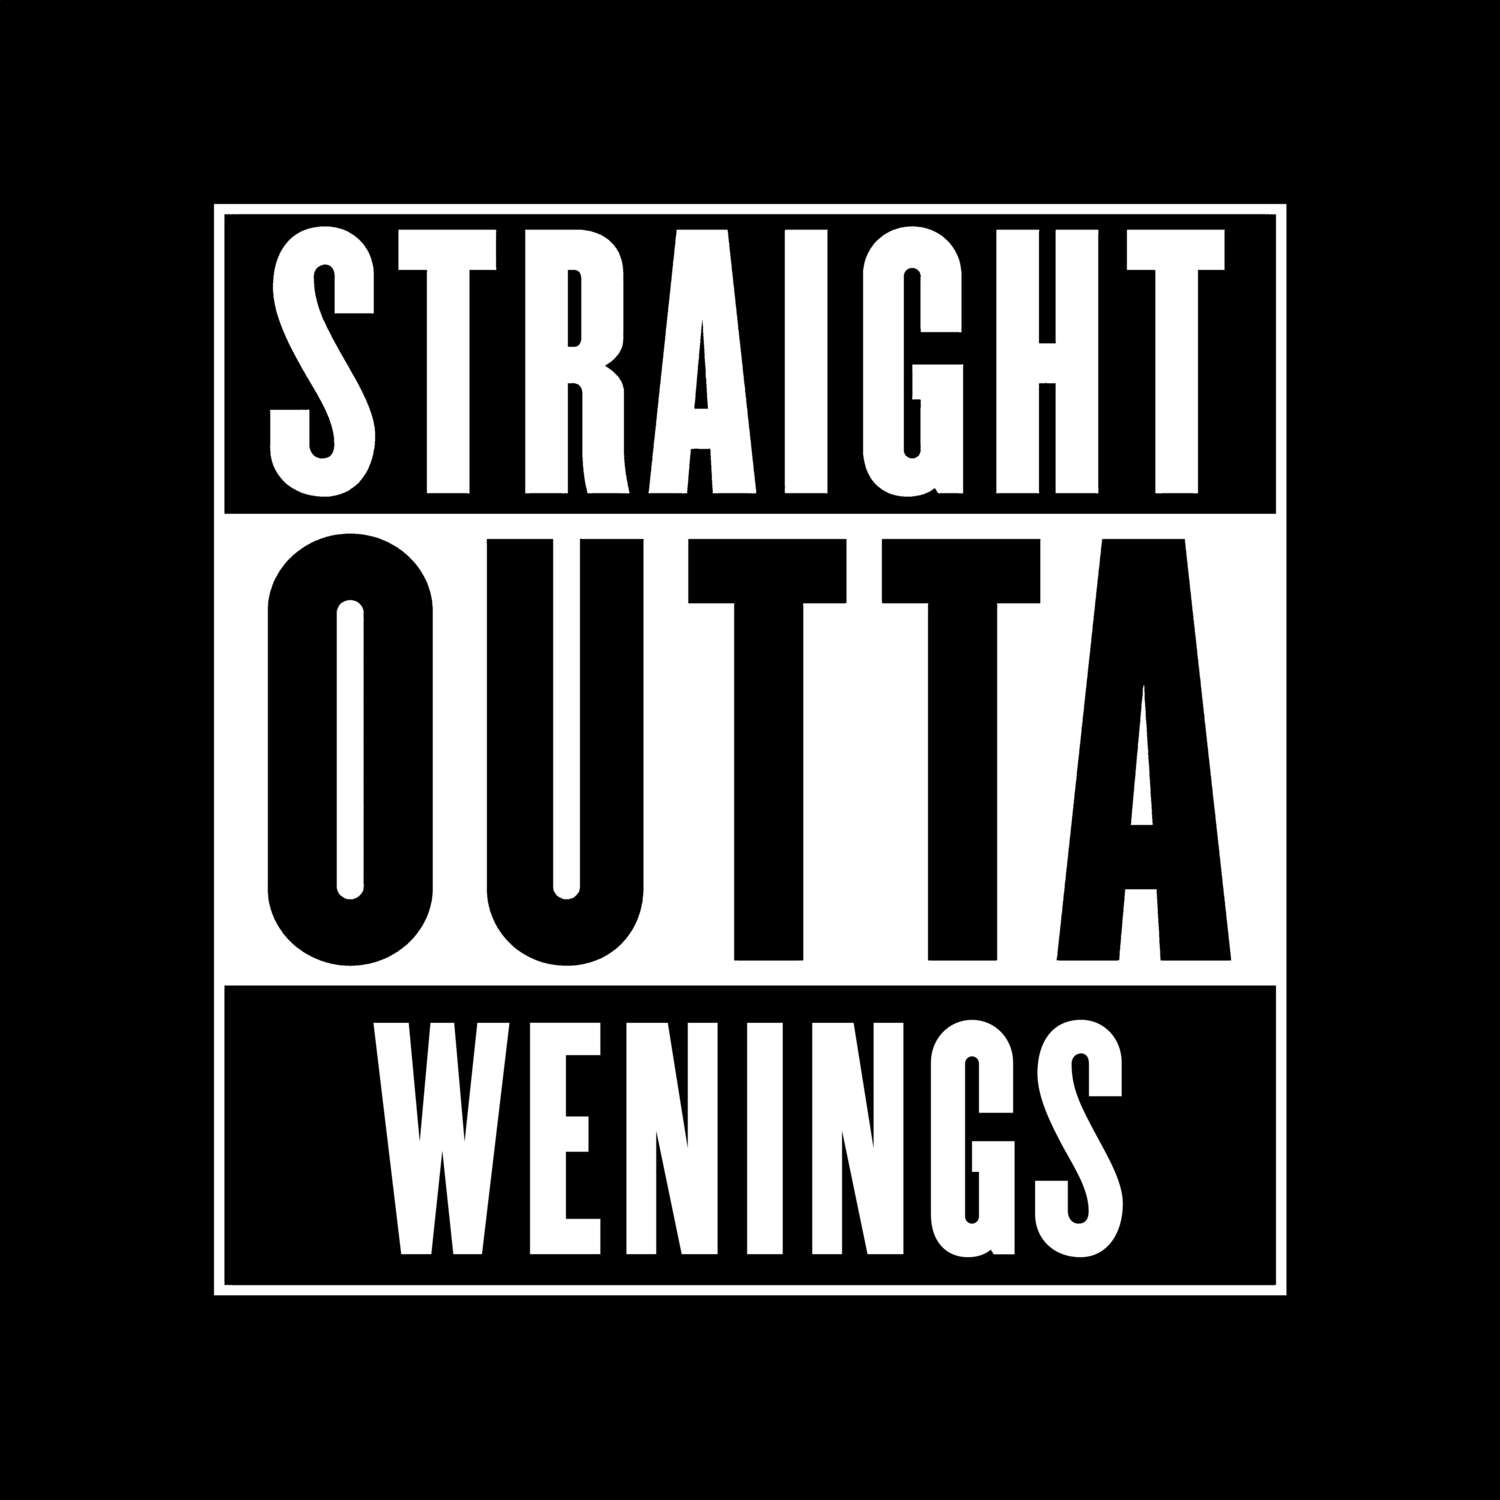 Wenings T-Shirt »Straight Outta«